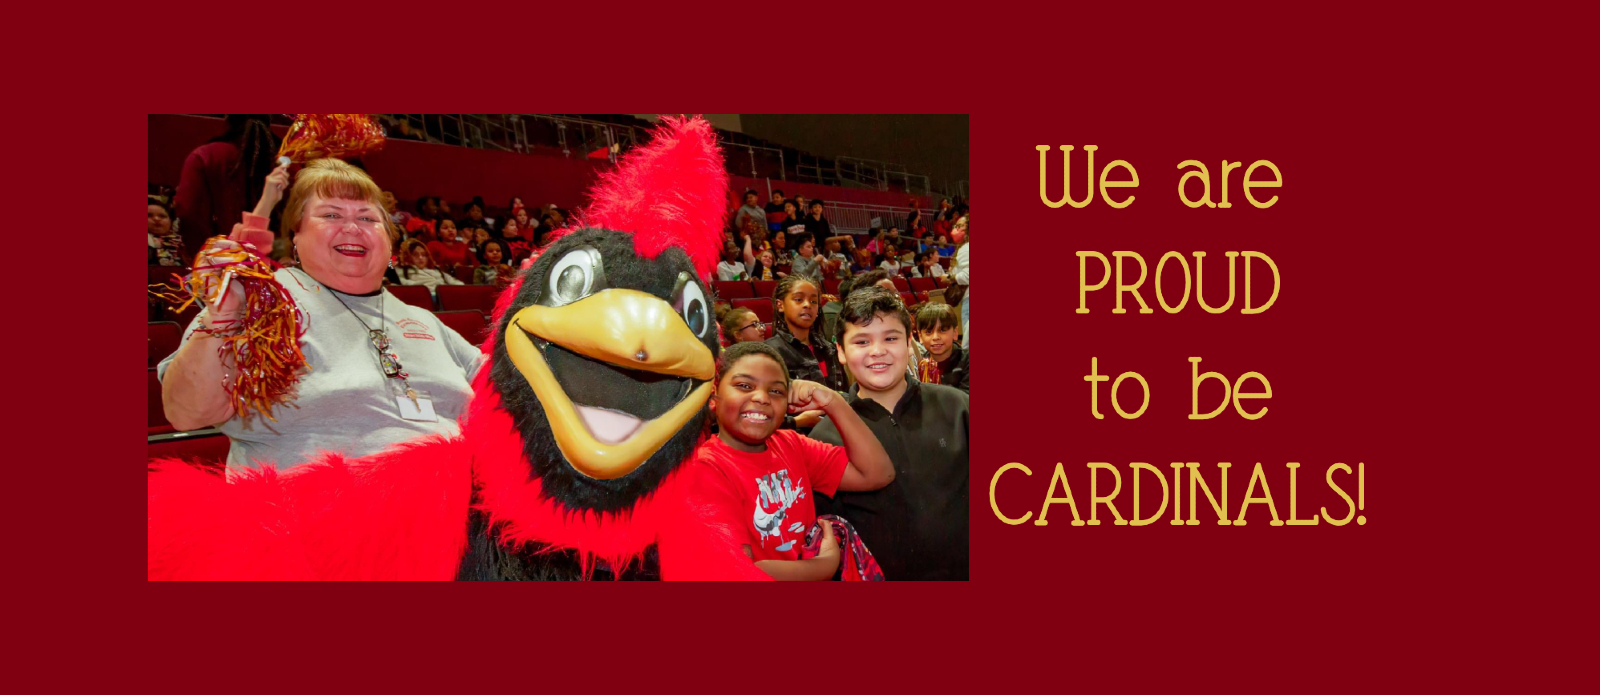 We are proud to be cardinals (image with three people posing with a cardinal mascot)